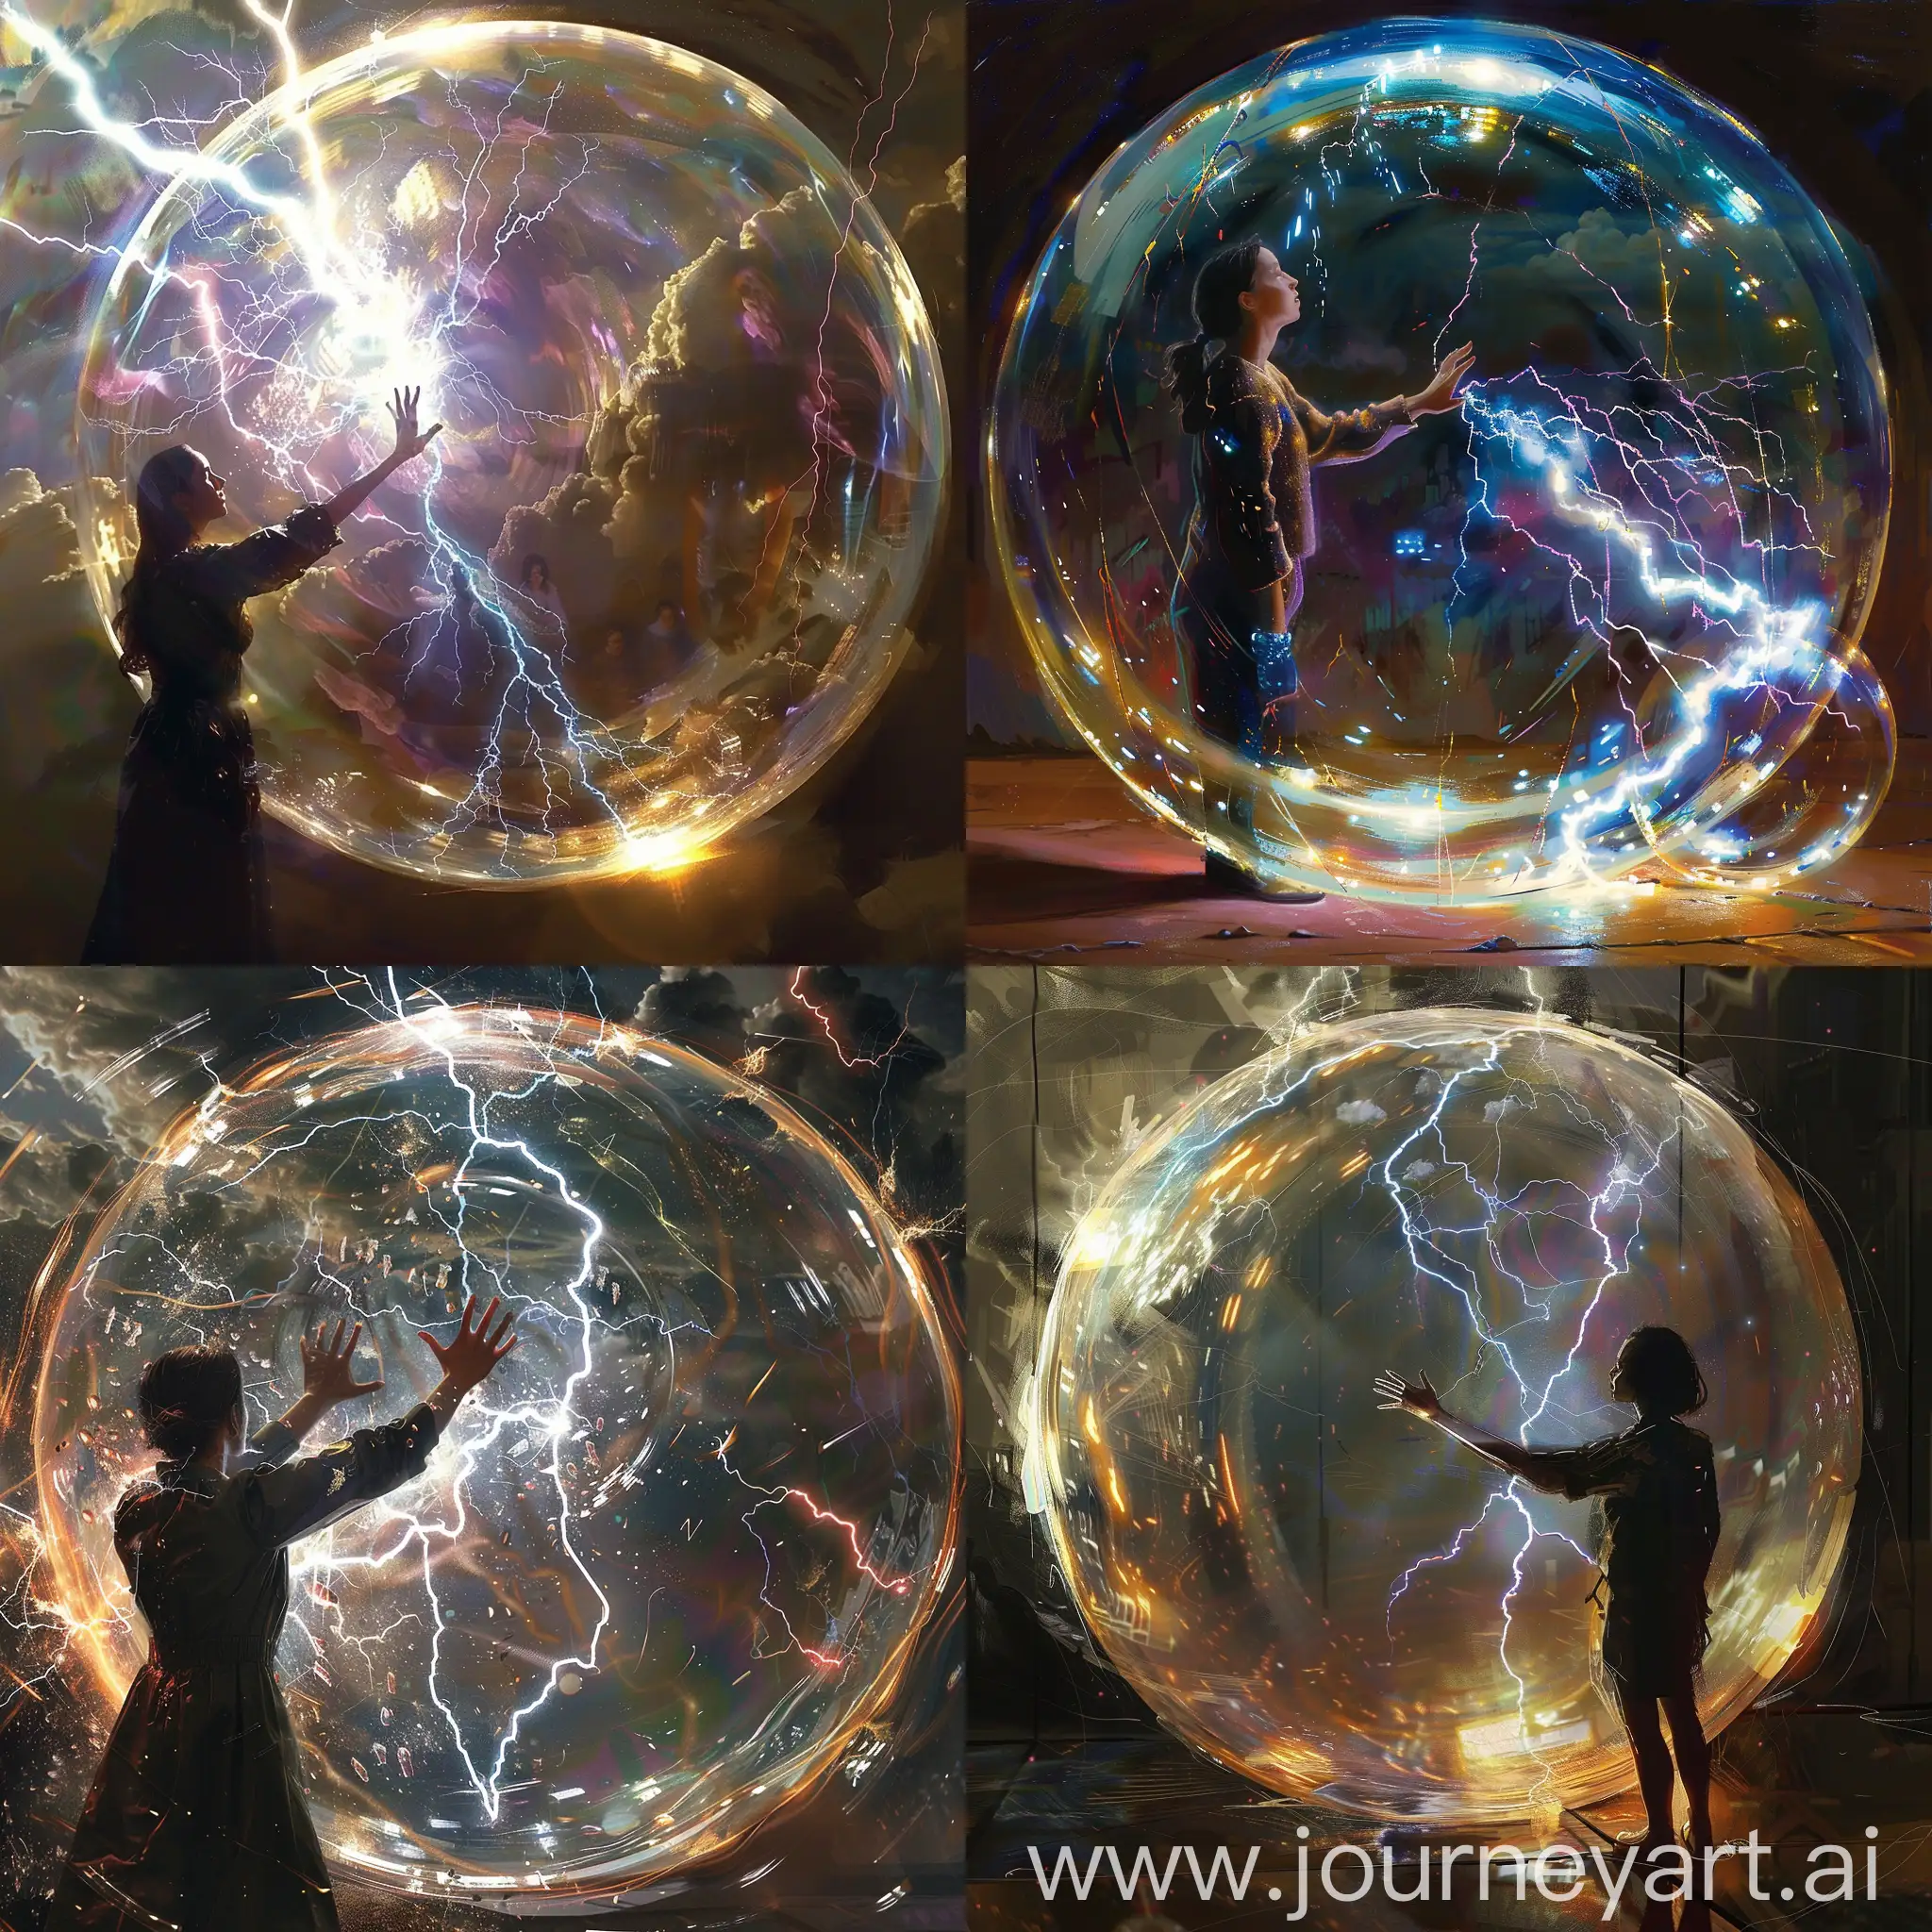 there is a big bubble, and there is a hand reaches into that huge bubble, there is a lady and there are lightning in the bubble